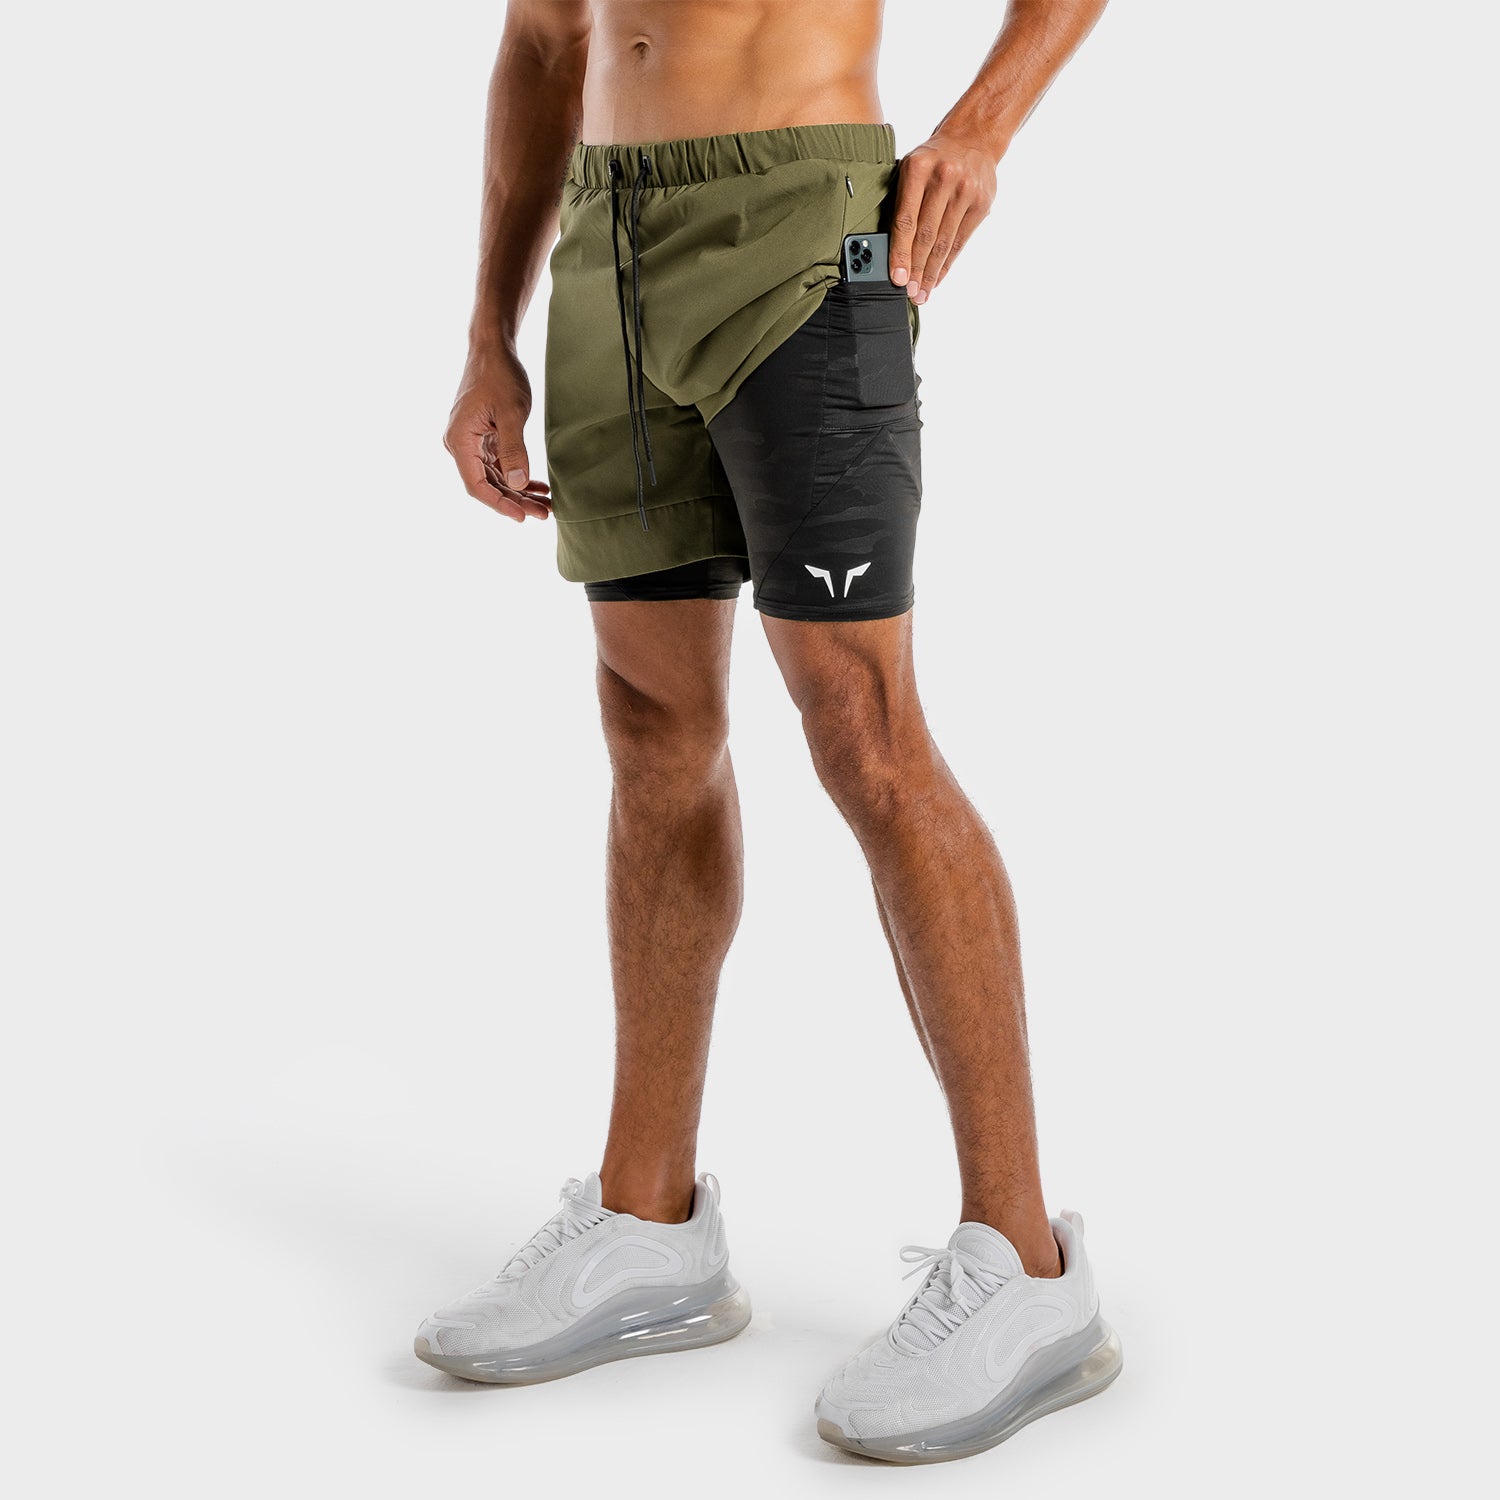 AE, Limitless 2-in-1 Shorts - Khaki And Black